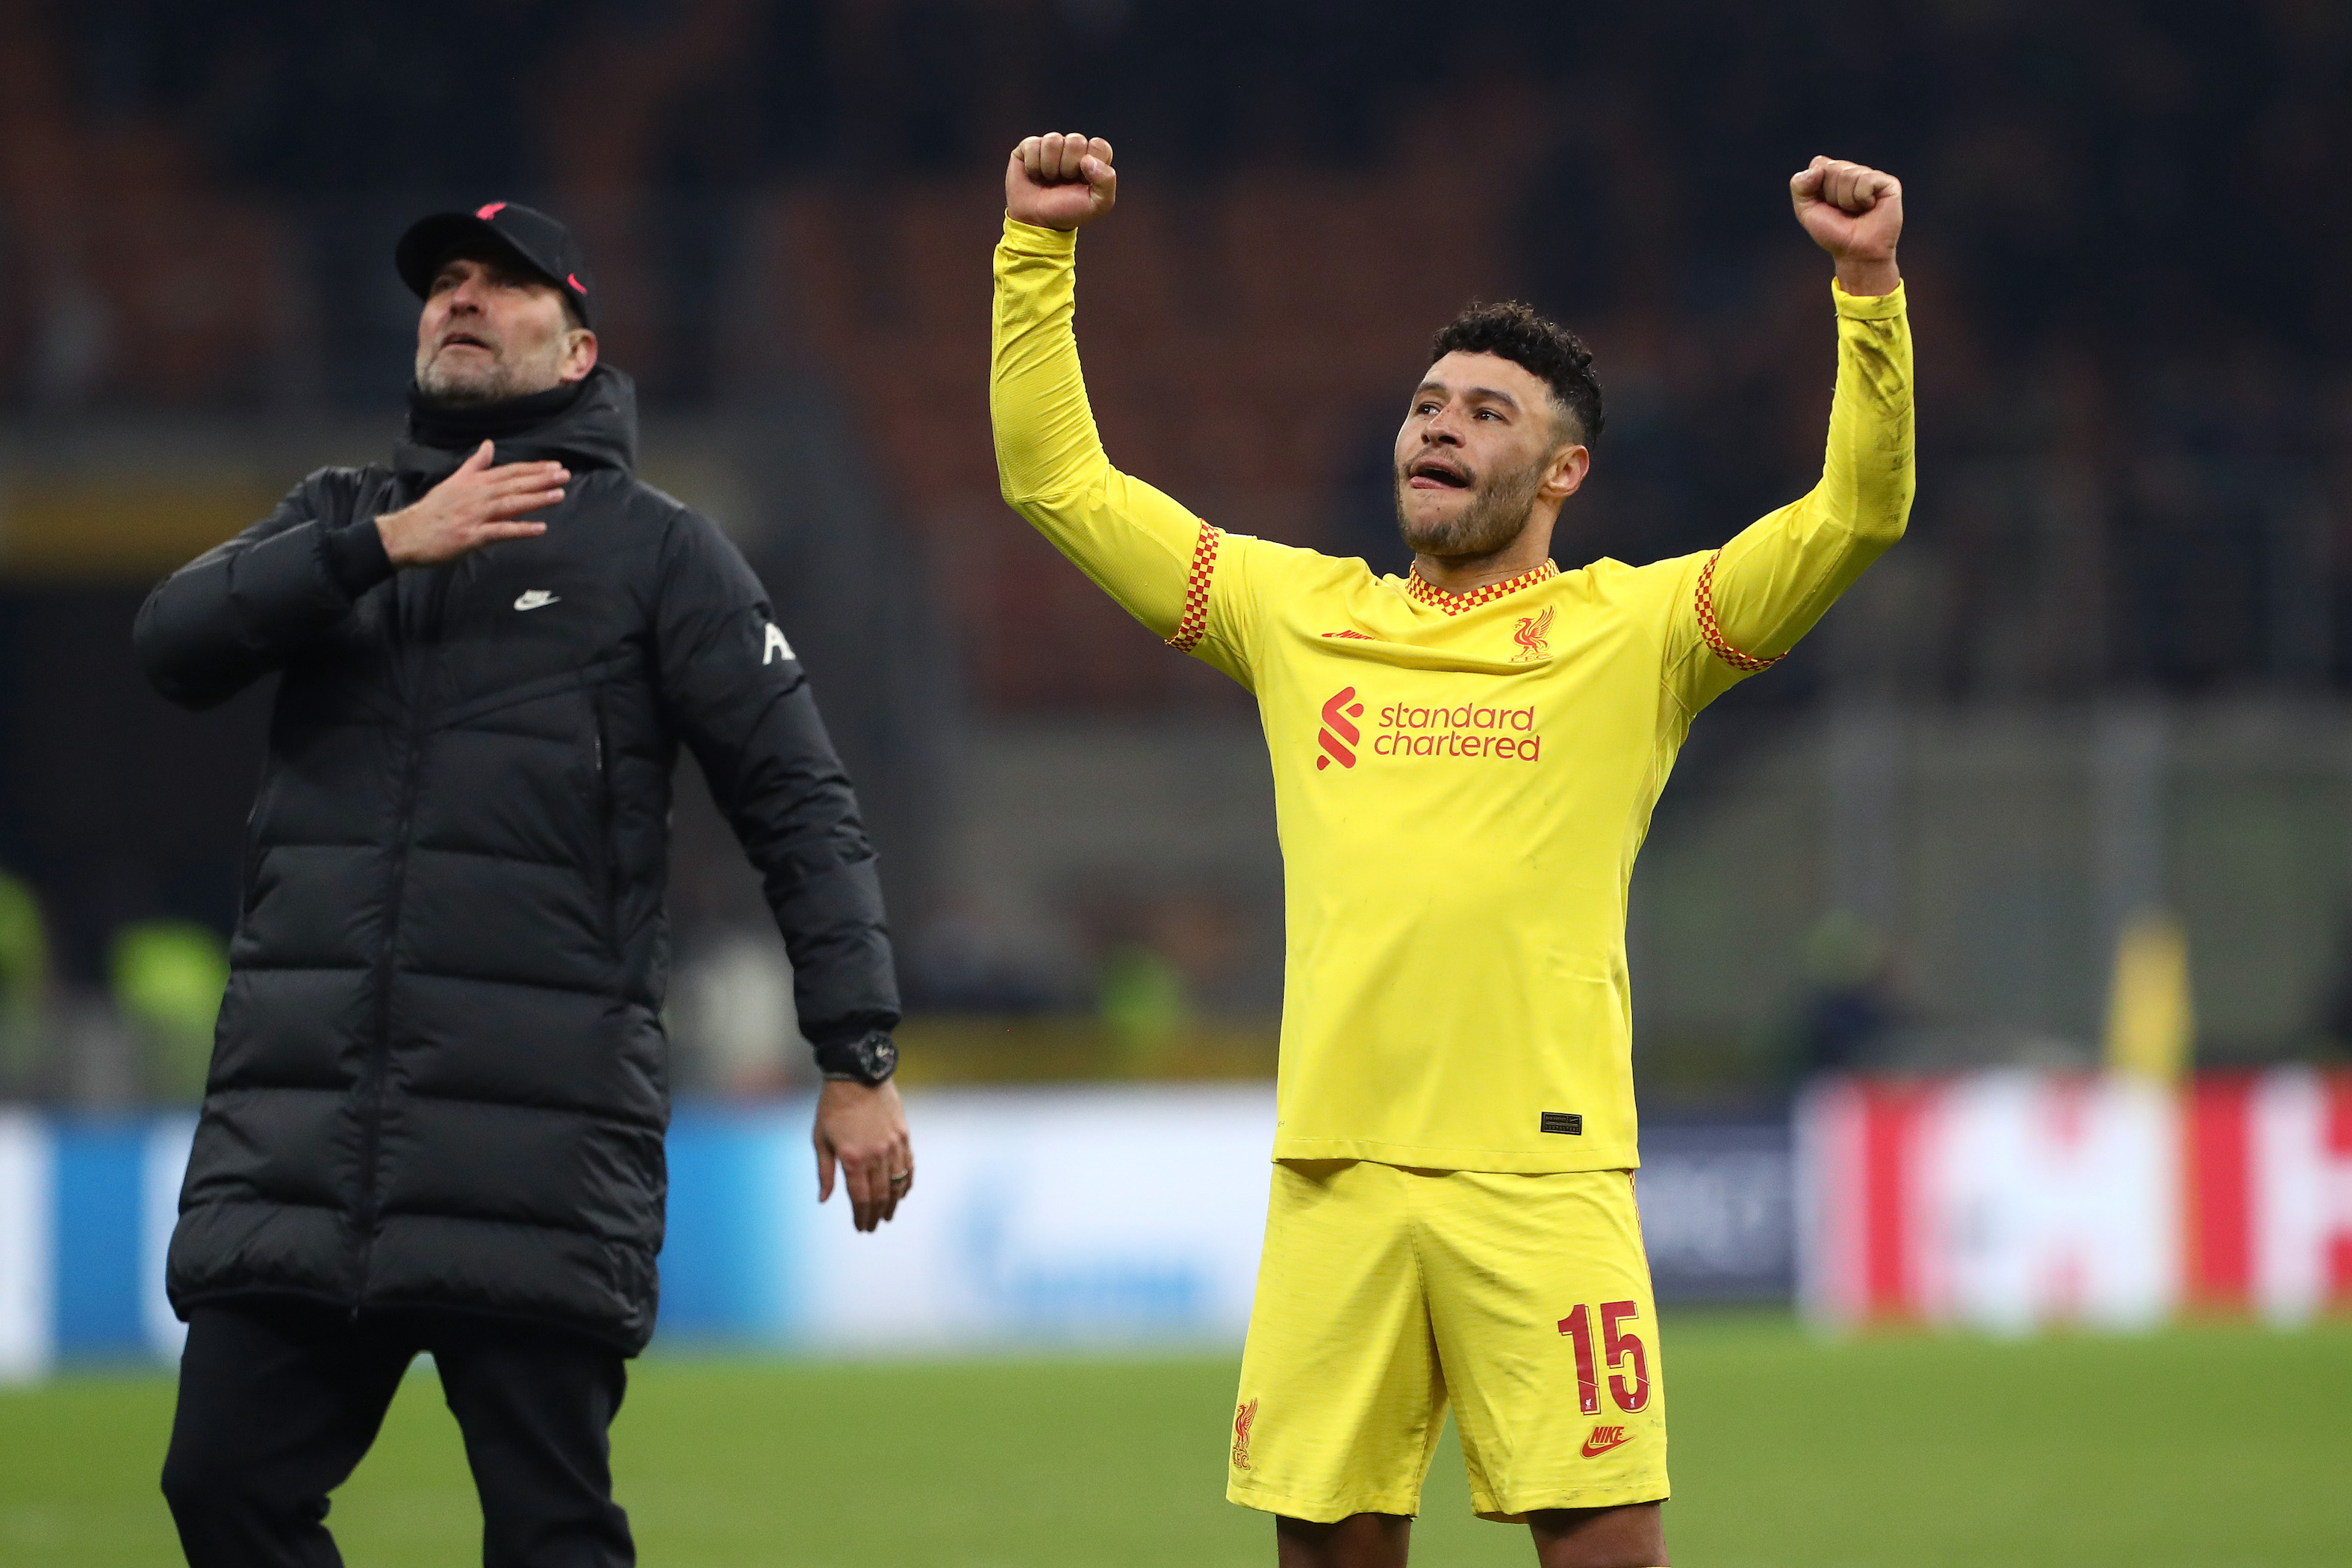 ‘Perfect’ ‘So good’ – Liverpool fans express delight at Oxlade-Chamberlain’s San Siro display